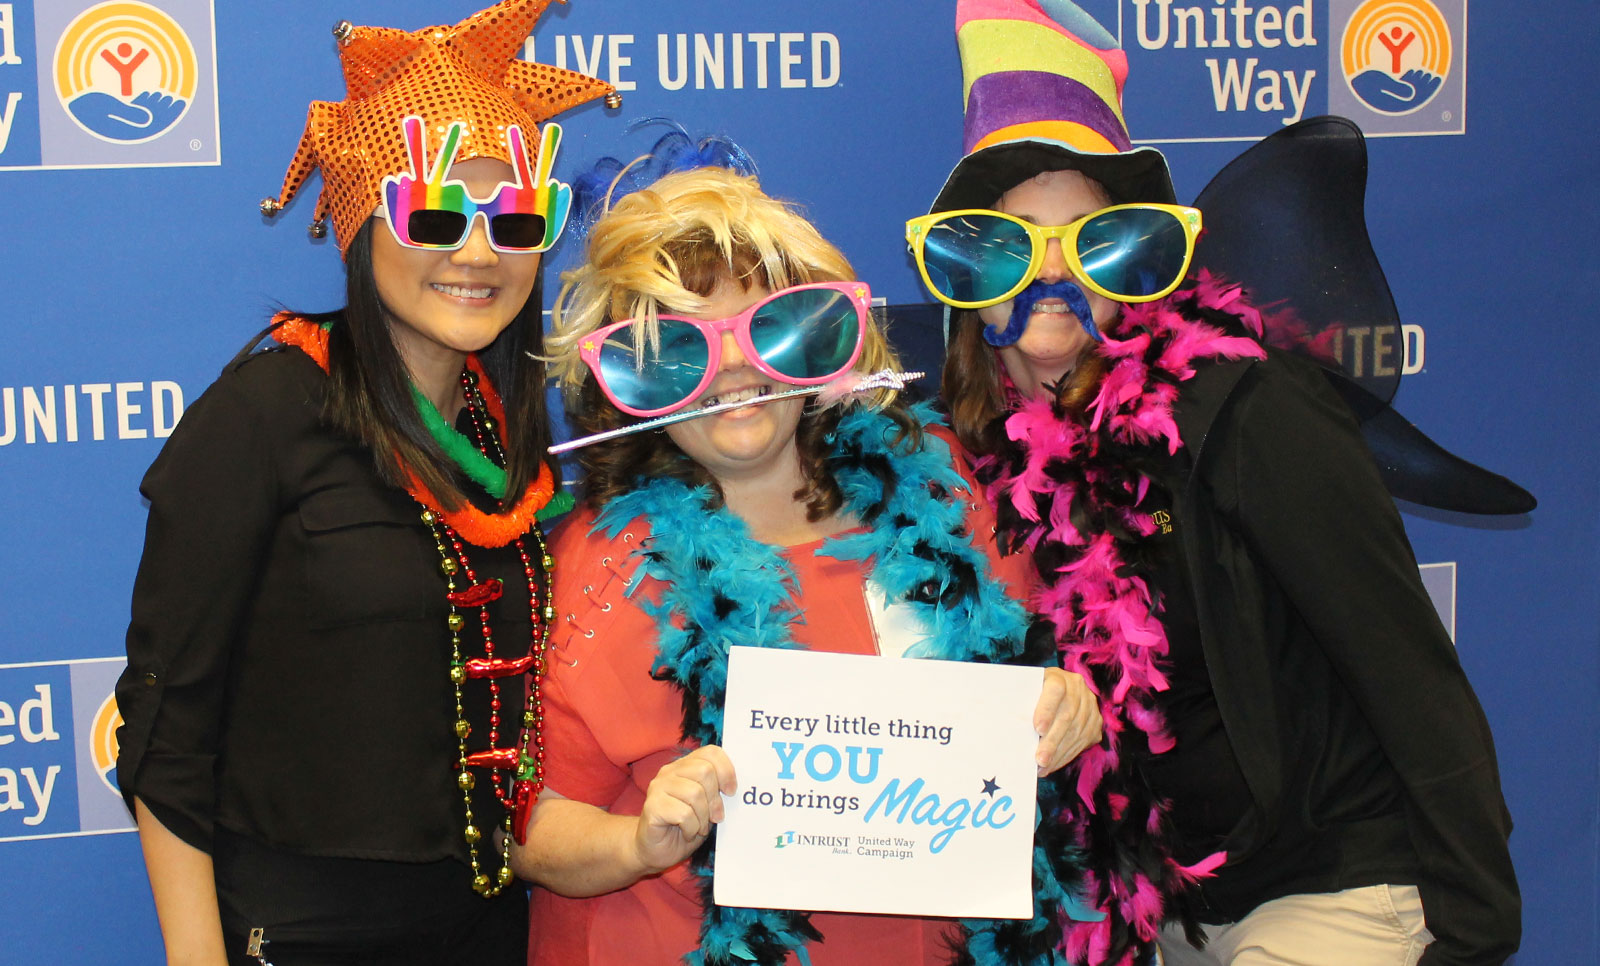 Employees taking part in the photo booth at our Agency Fair